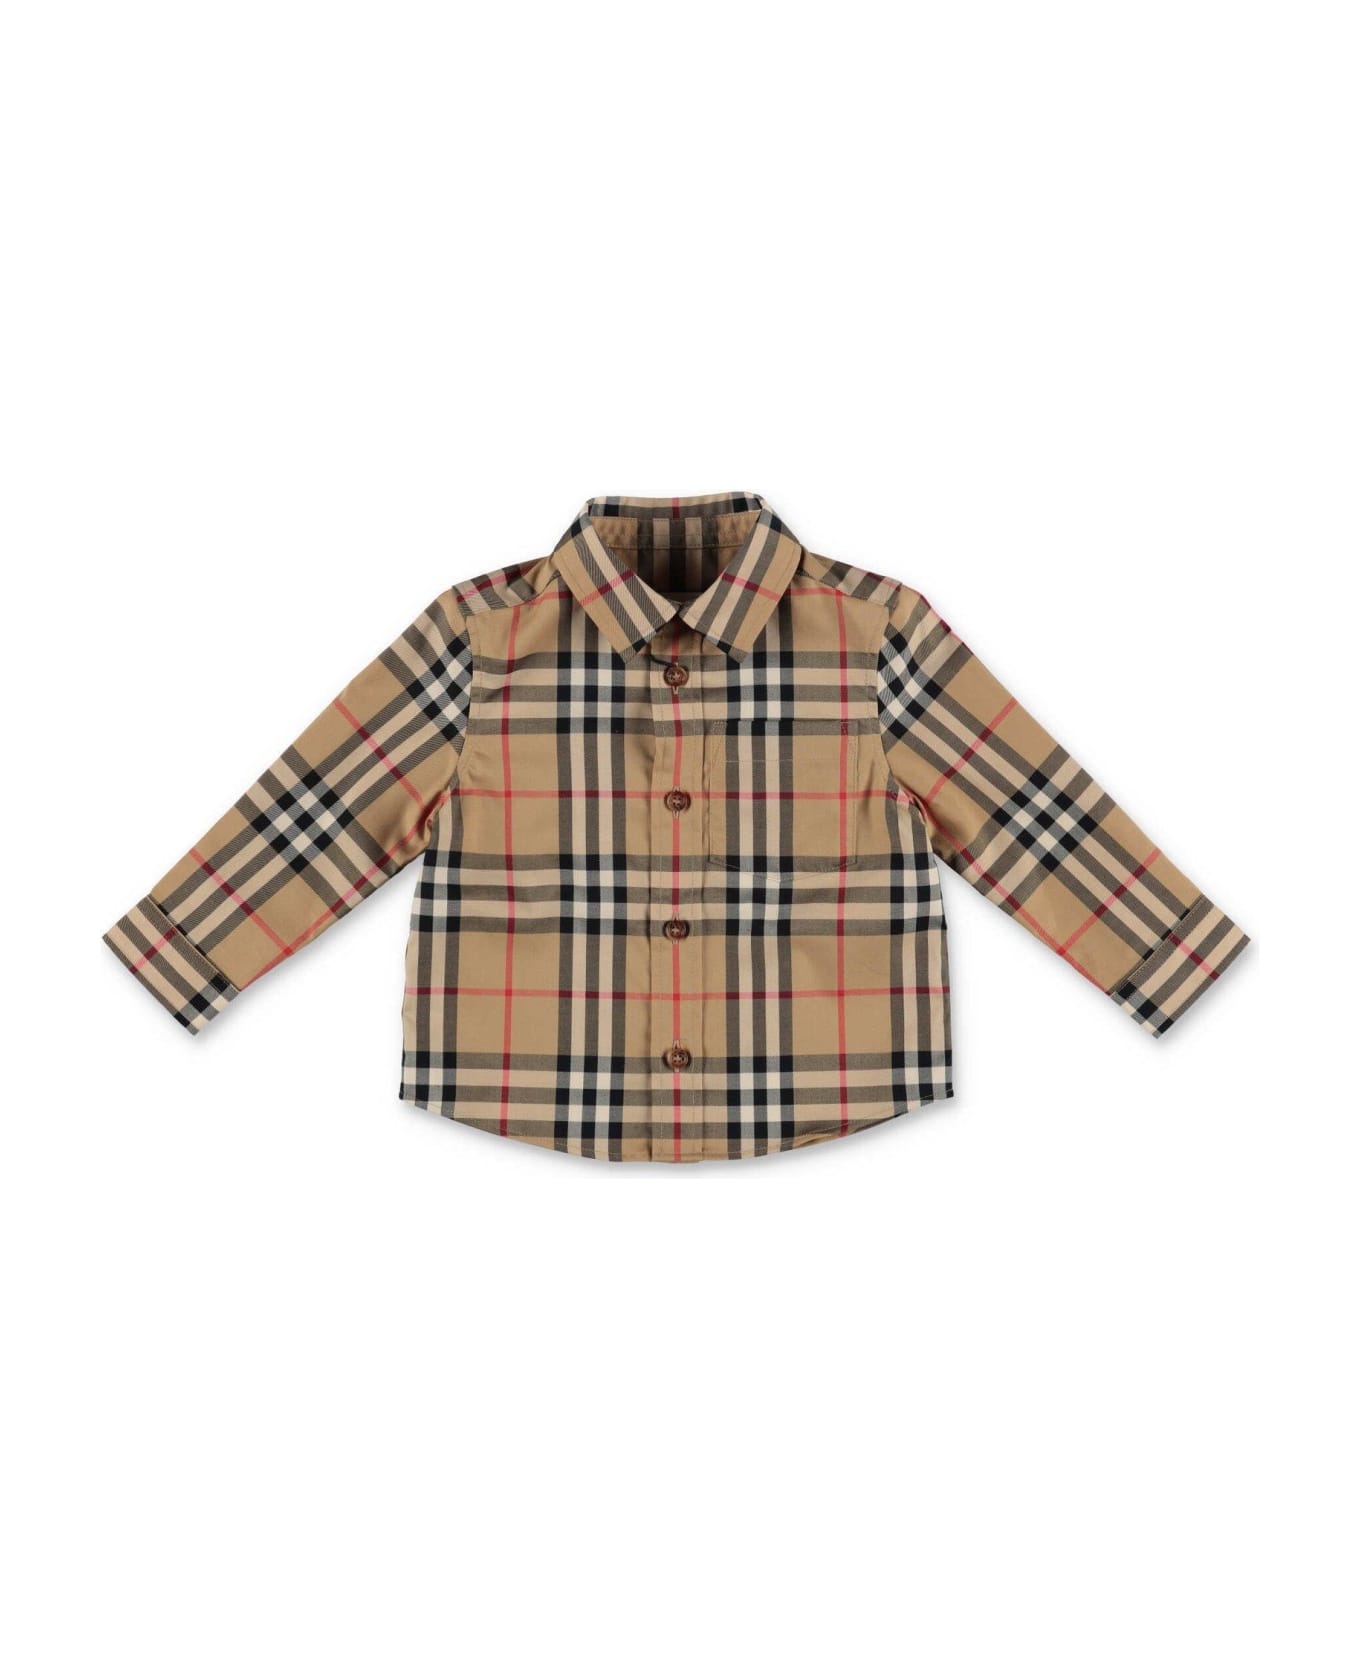 Burberry Checked Long-sleeved Shirt - Archive beige ip chk